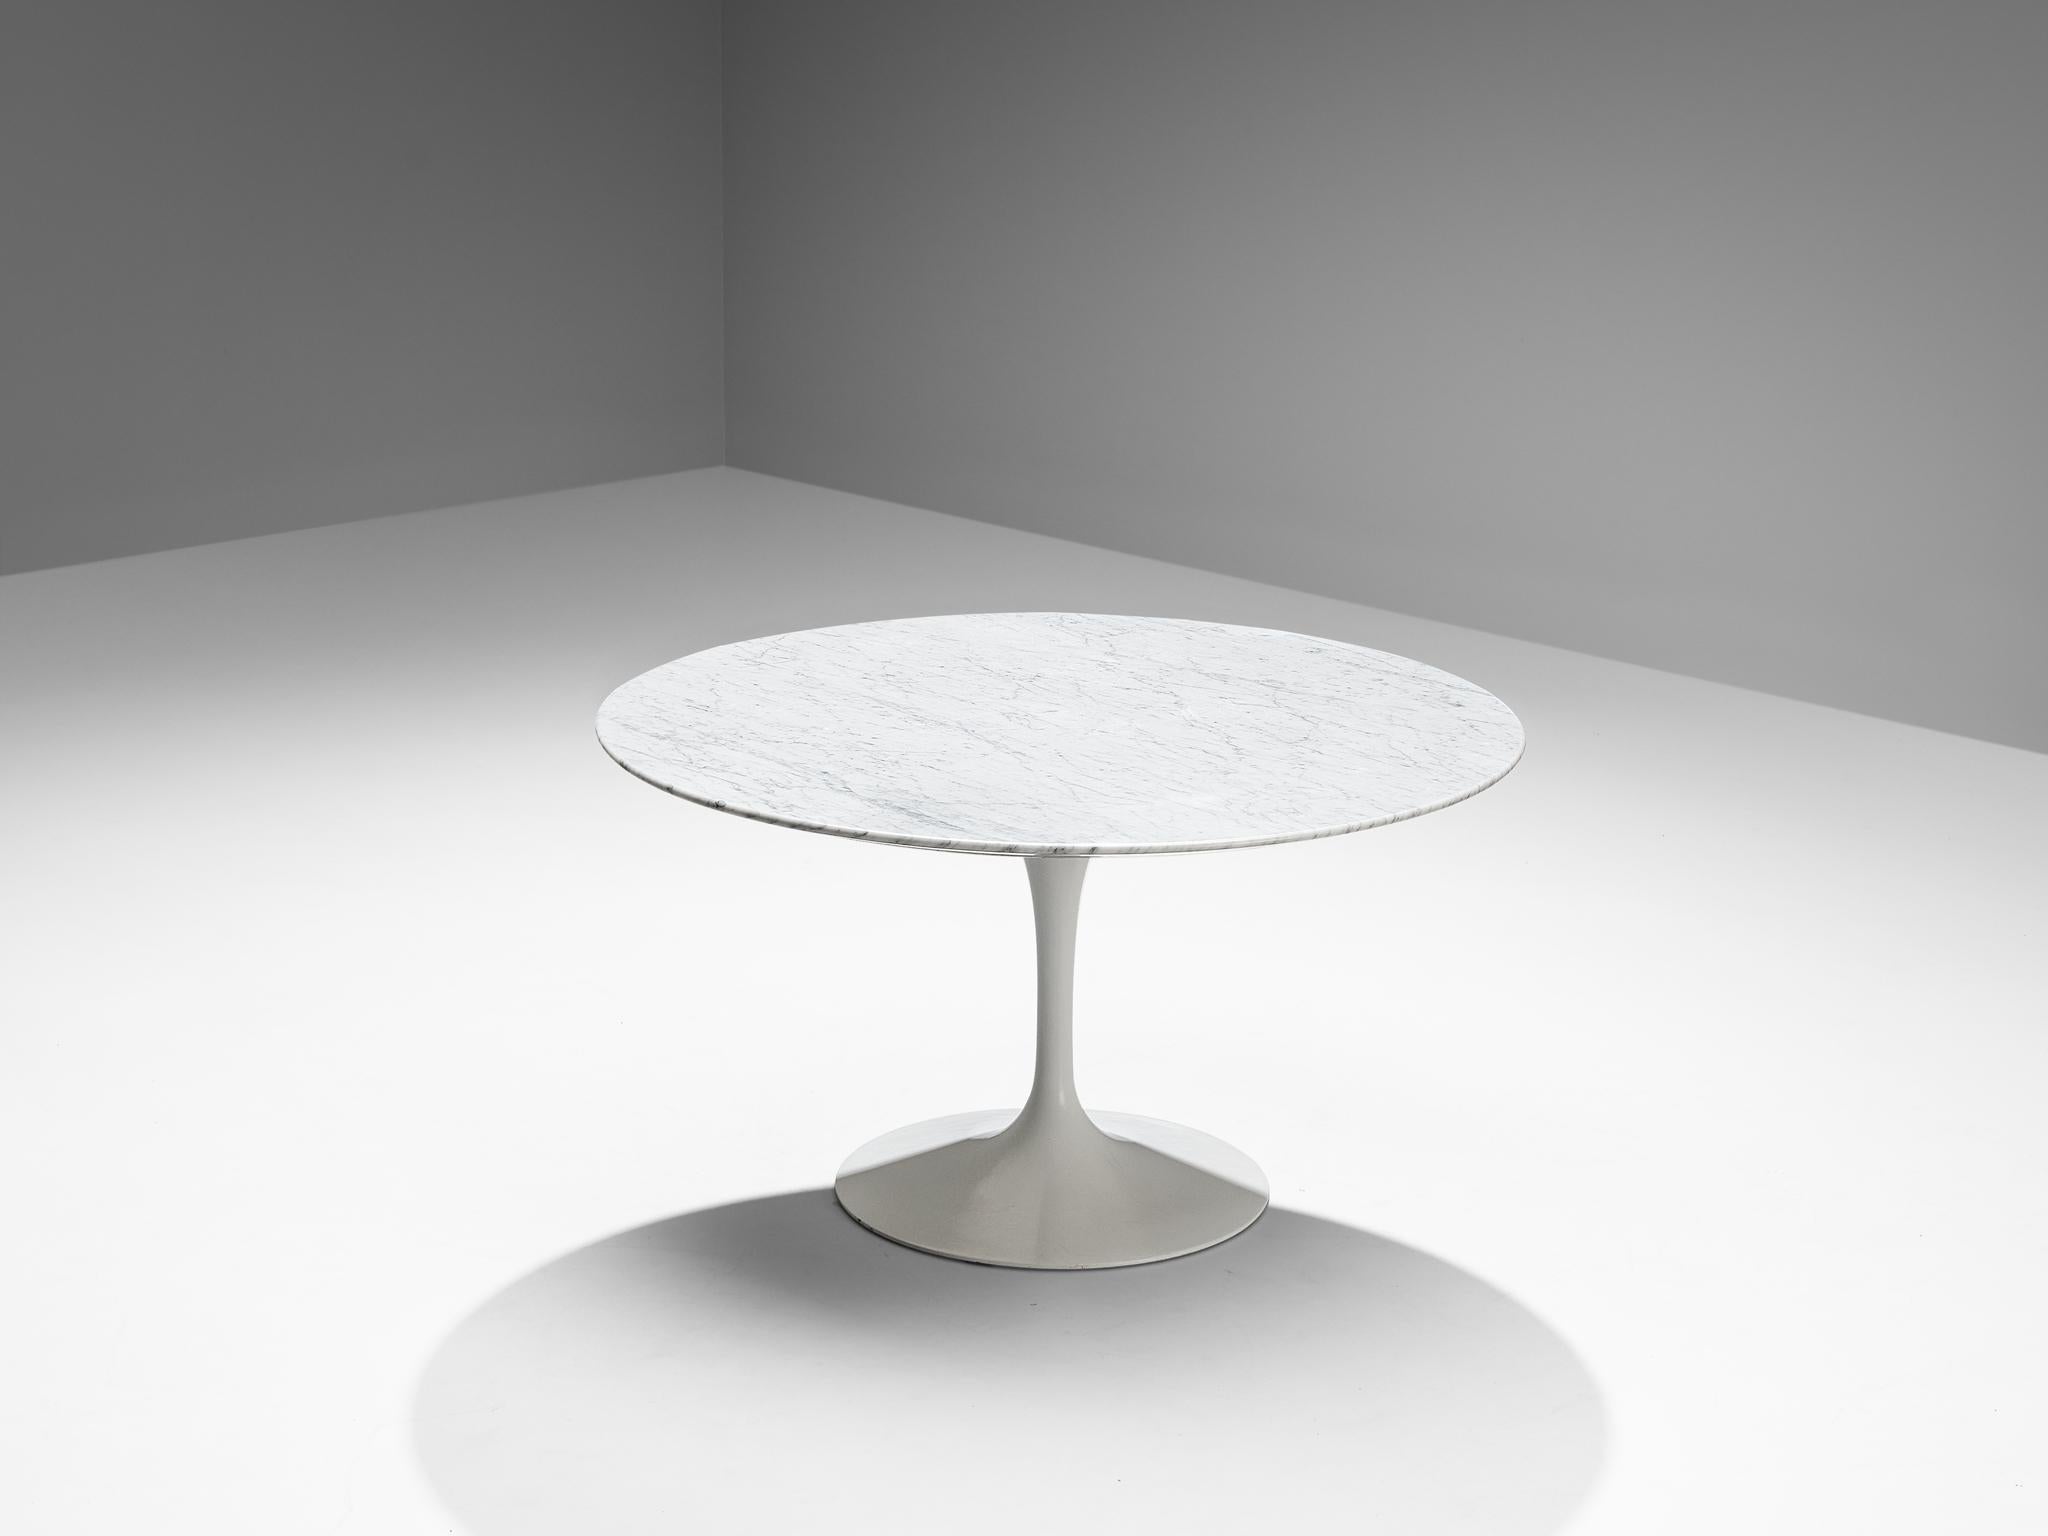 Eero Saarinen for Knoll International, dining table, metal, marble, United States, 1958.

This iconic pedestal table from the Tulip collection is designed by Eero Saarinen in the 1950s and it took him five years to arrive at this exact design.